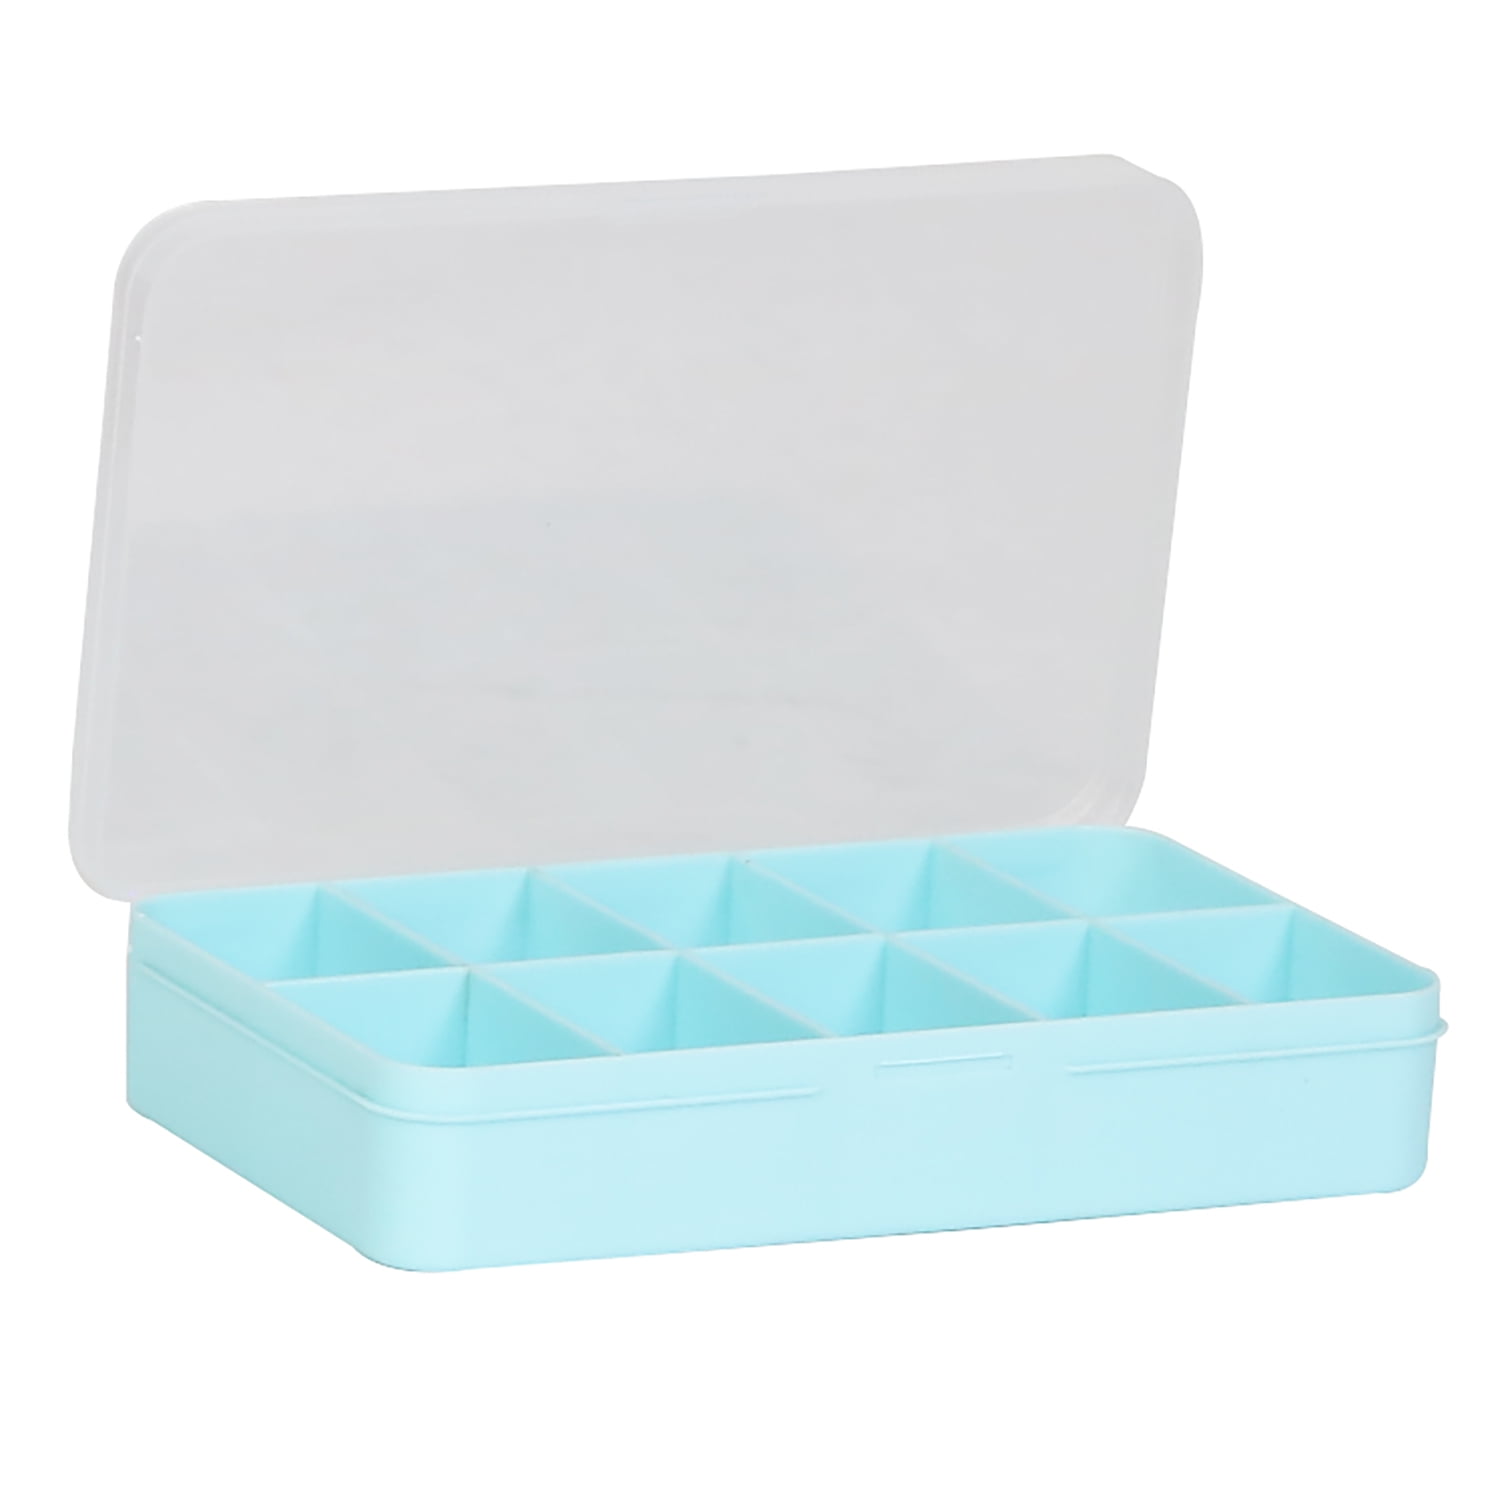 1, 5 or 10 Adjustable Transparent Storage Box 10 Compartments 133x100x27 Mm  ideal for Storing Beads, Buttons, Fishing, Etc. 